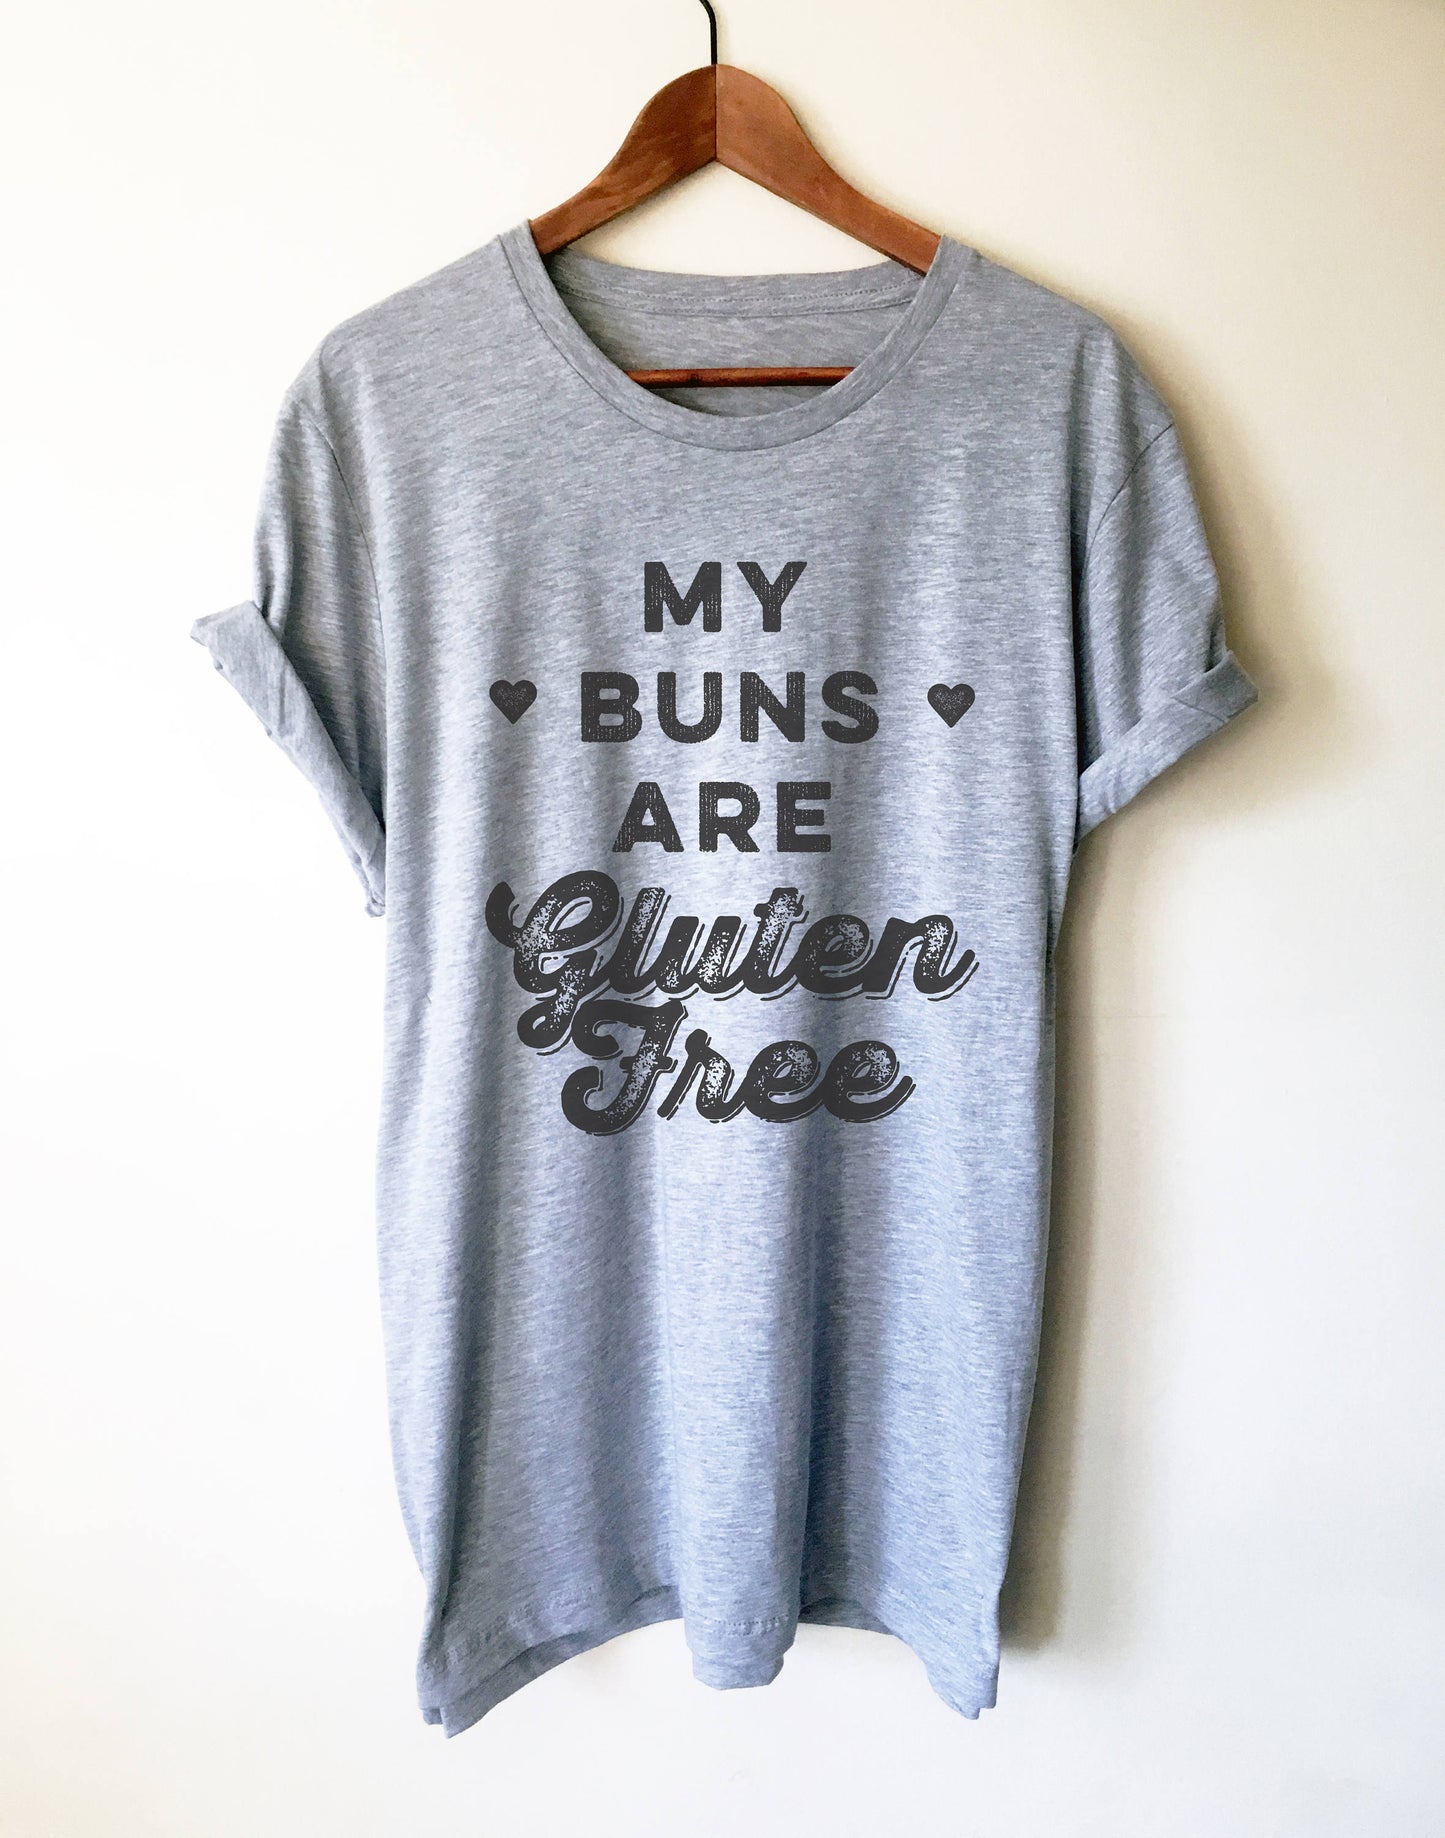 My Buns Are Gluten Free Unisex Shirt - Baking Shirt, Holiday Baking Shirt, Chef Shirts, Gifts For Bakers, Funny Baking Tee, Gluten free